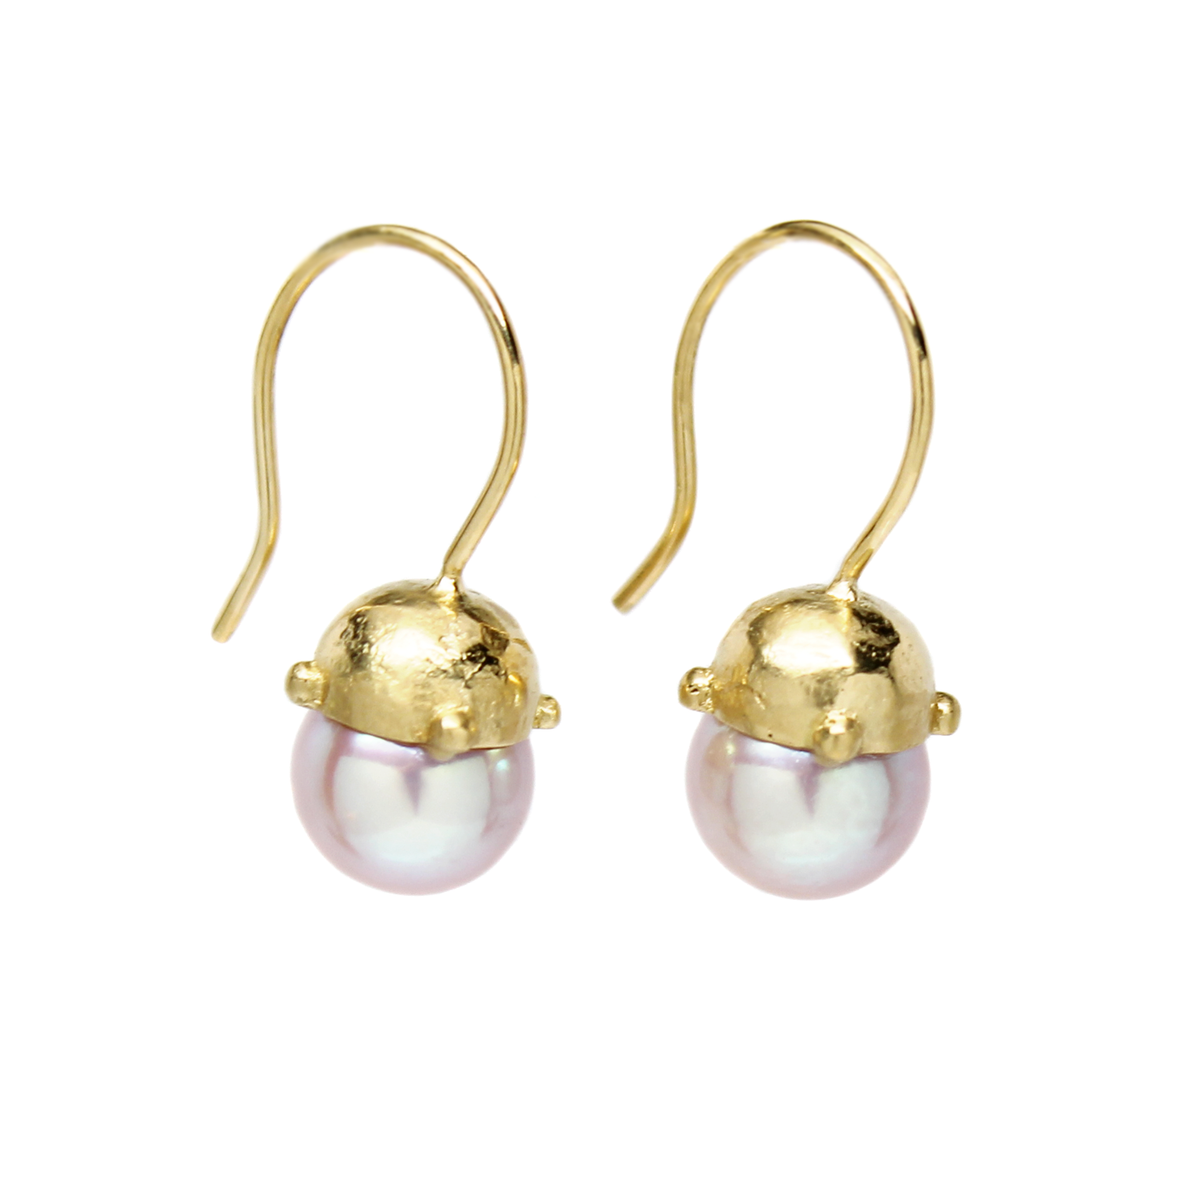 One-of-a-Kind Dotted Dome Pink Pearl Drops